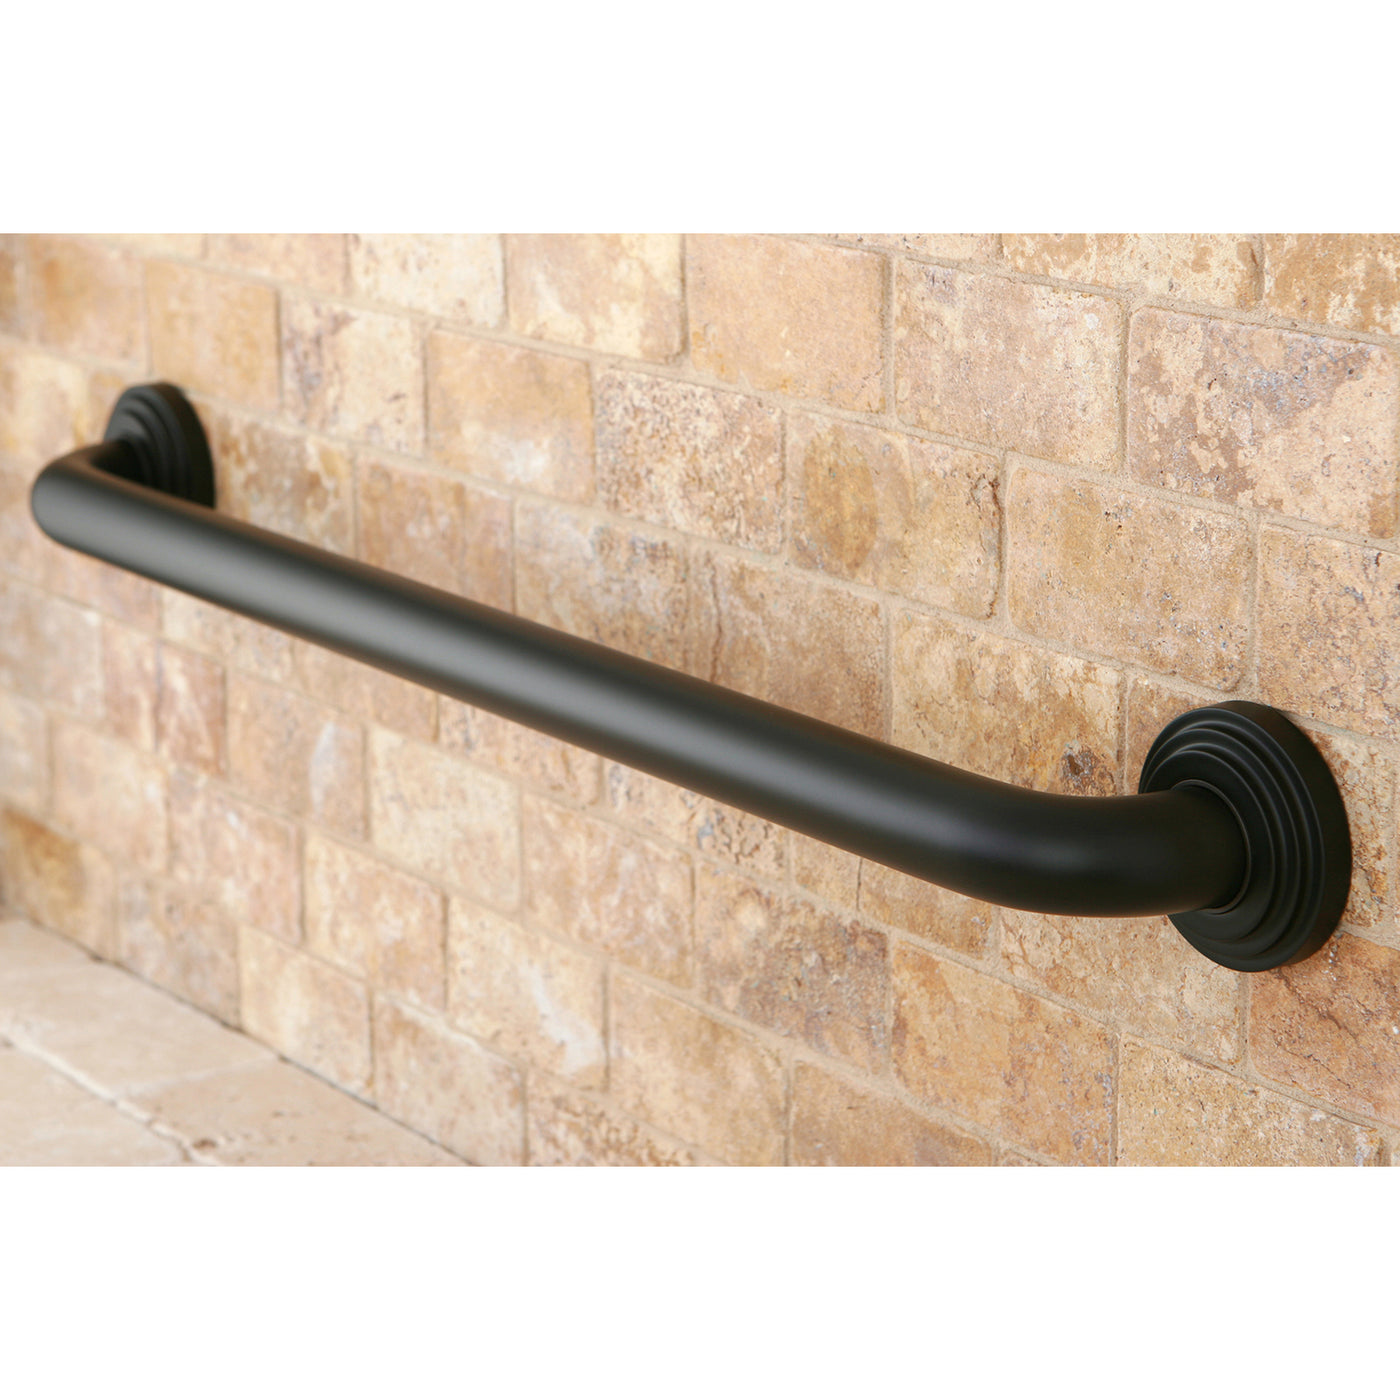 Elements of Design EDR214245 24-Inch X 1-1/4-Inch OD Grab Bar, Oil Rubbed Bronze